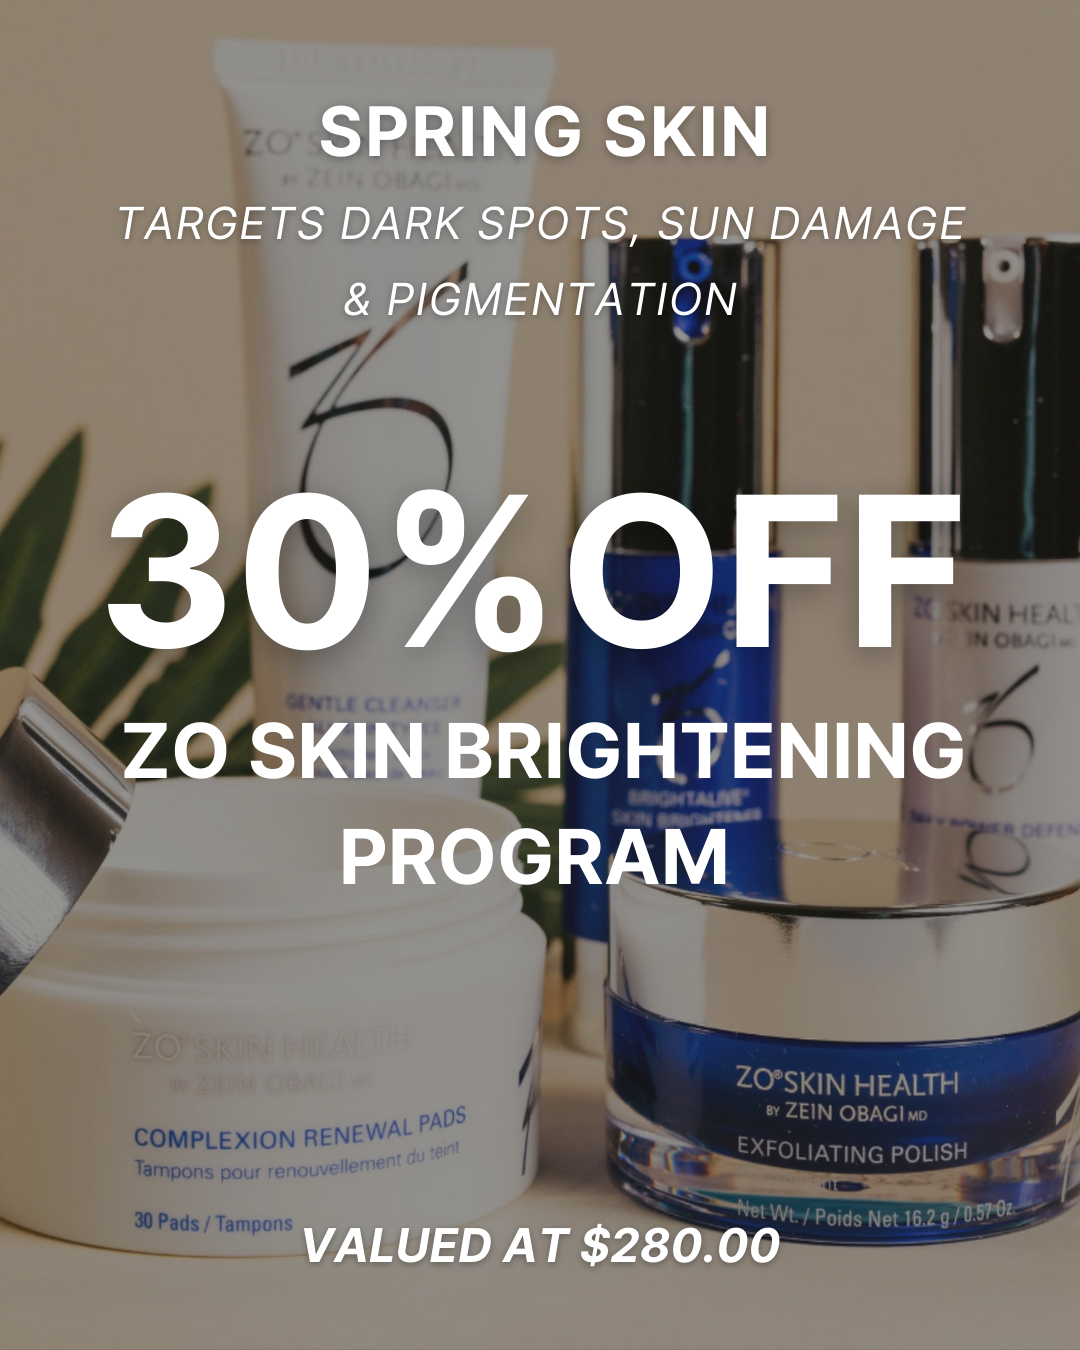 Zo skin health special promotion